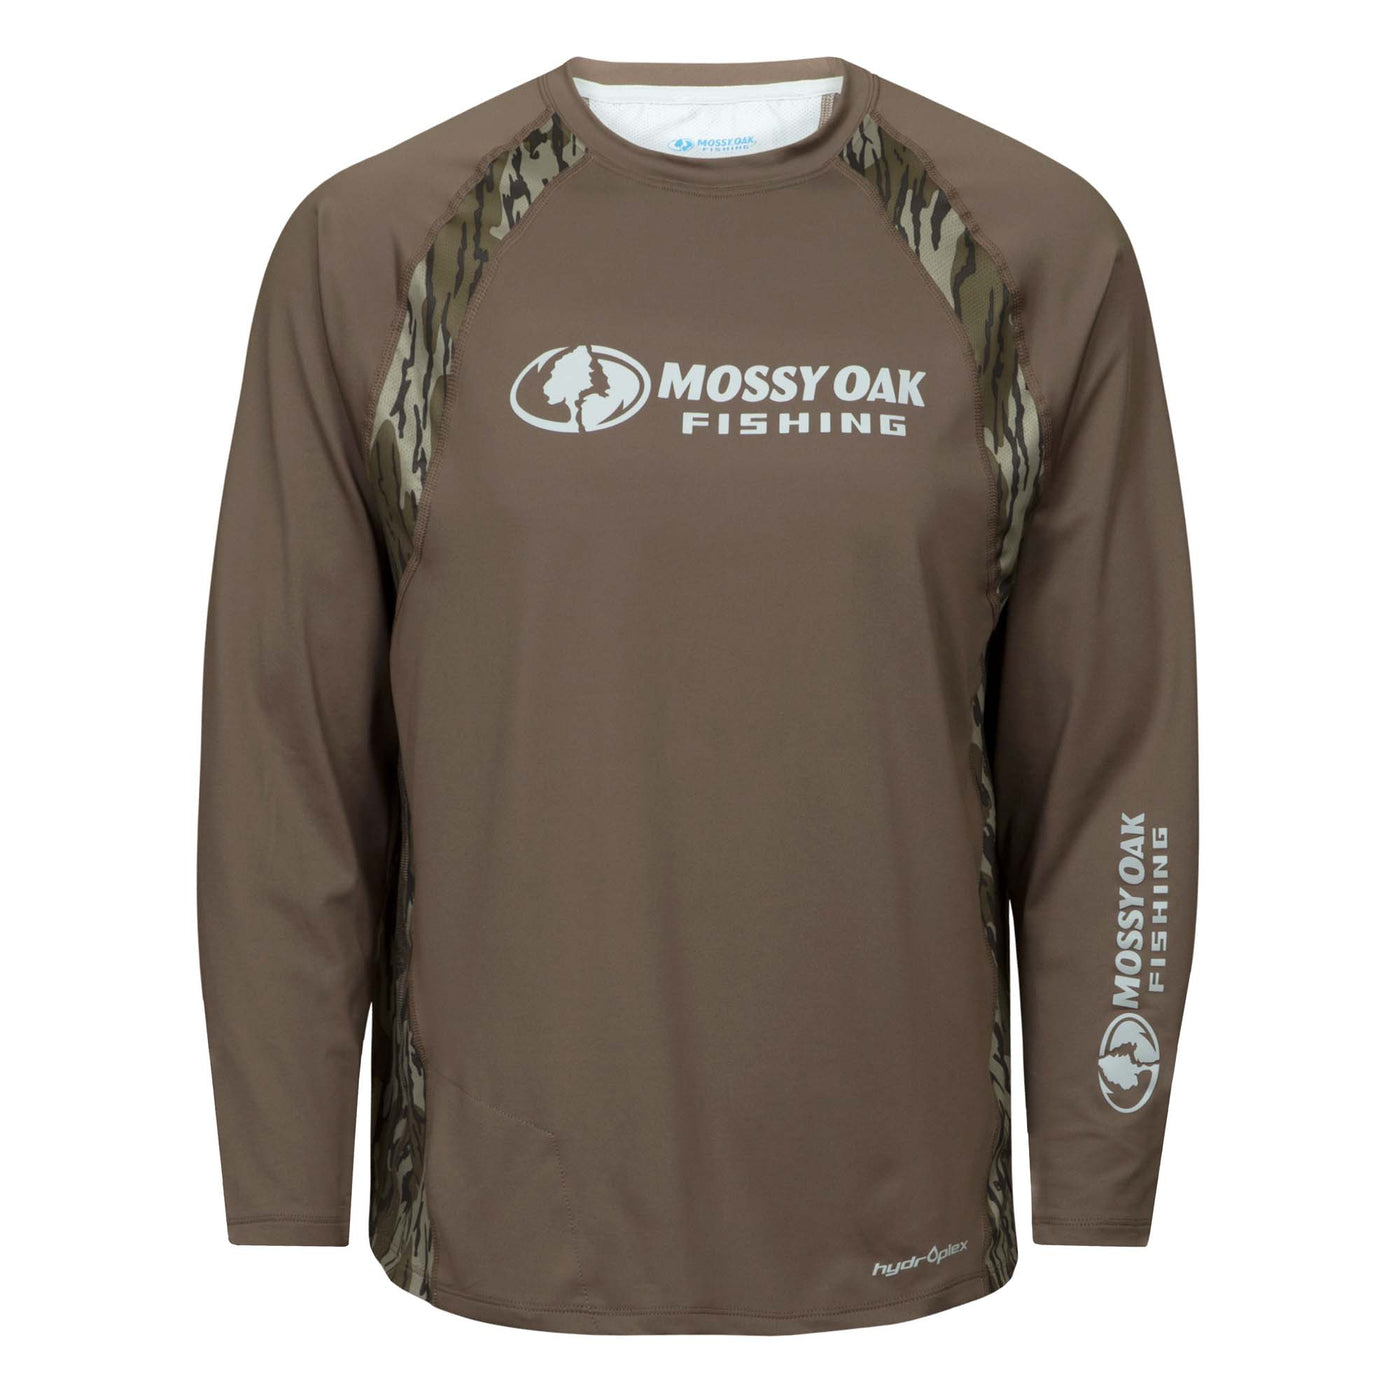 Mossy Oak Men's Polyester Fishing Shirts & Tops for sale